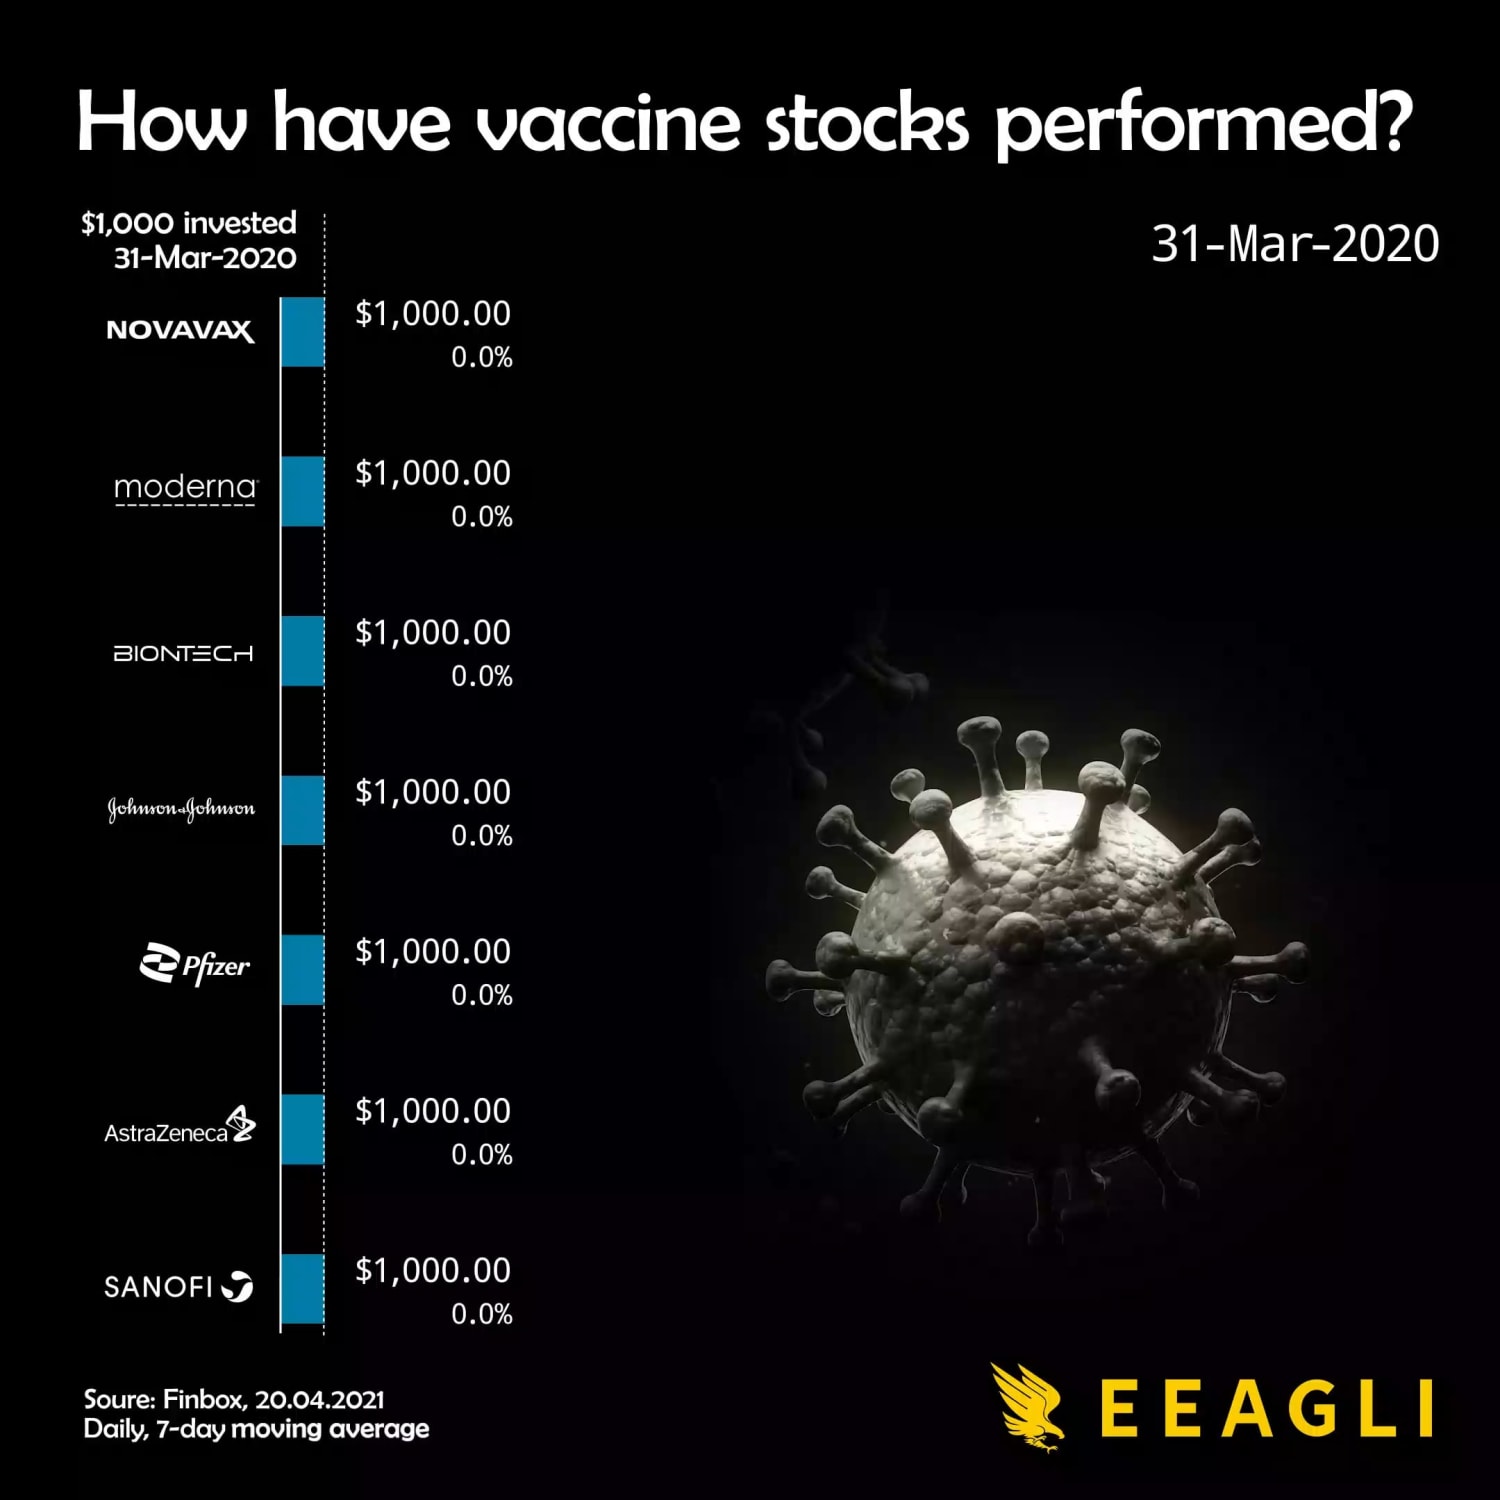 If you invested $1,000 in these vaccine stocks a year ago, how would they have done?